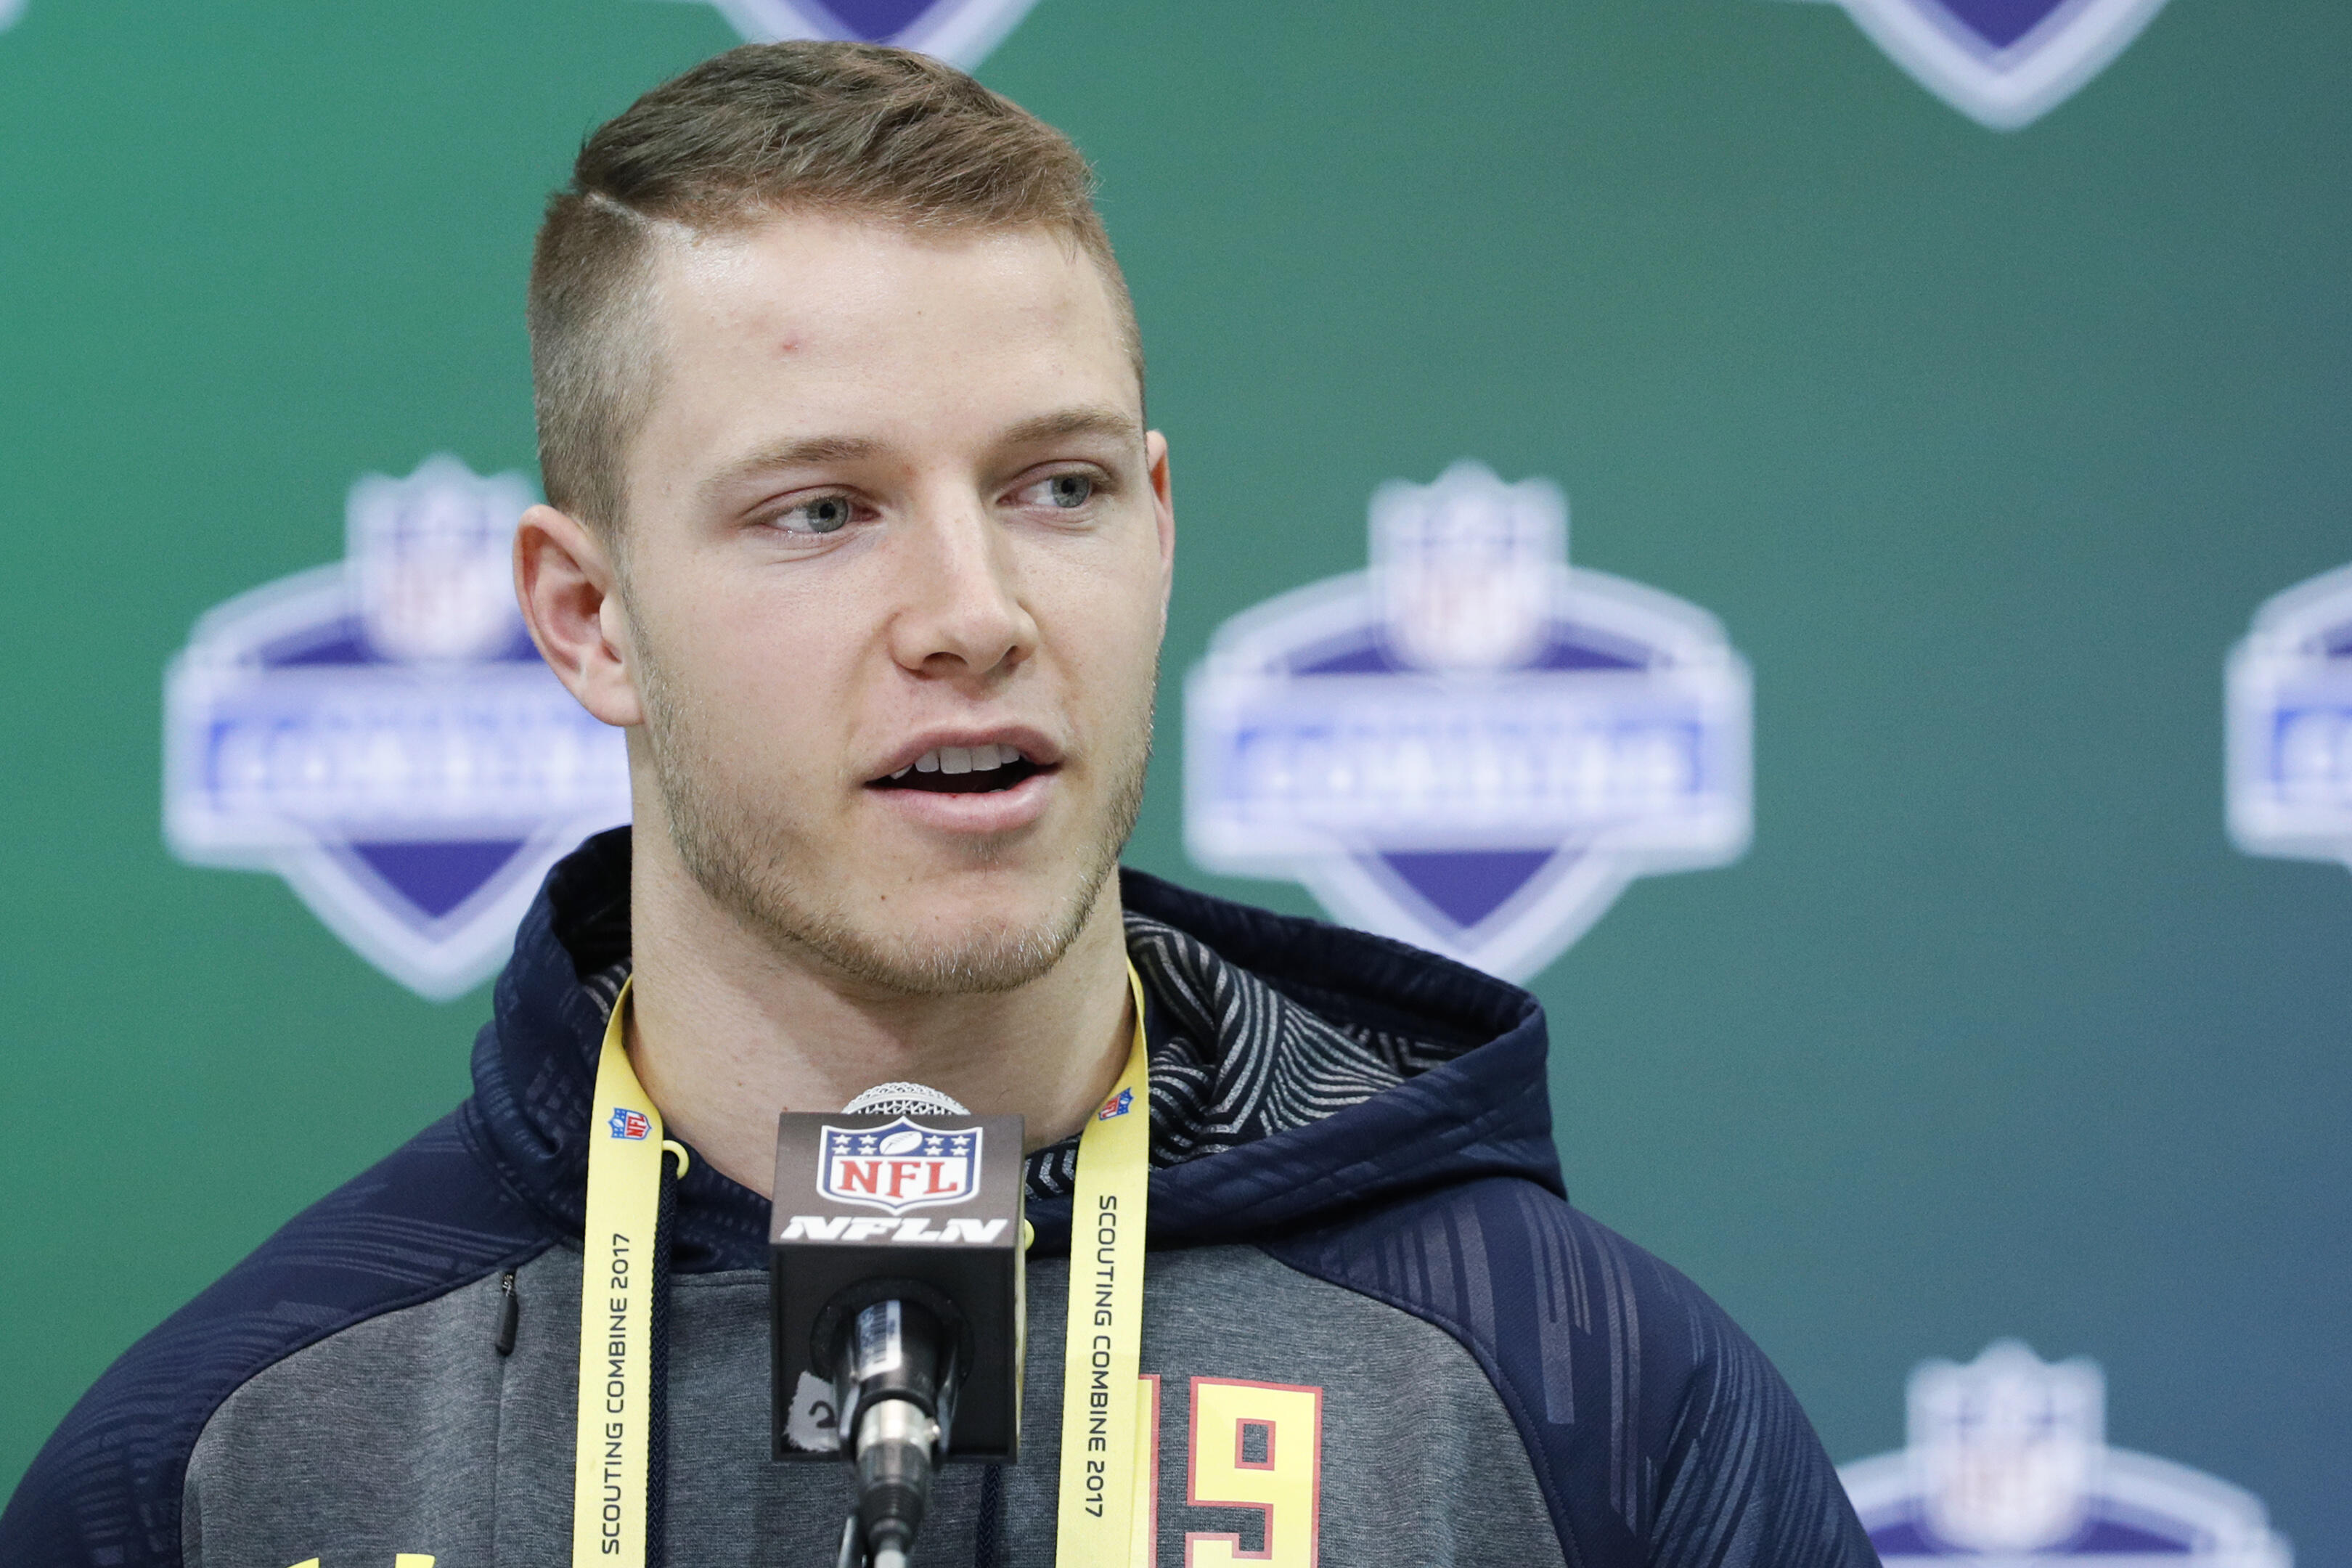 INDIANAPOLIS, IN - MARCH 02: Running back Christian McCaffrey of Stanford answers questions from the media on Day 2 of the NFL Combine at the Indiana Convention Center on March 2, 2017 in Indianapolis, Indiana. (Photo by Joe Robbins/Getty Images)